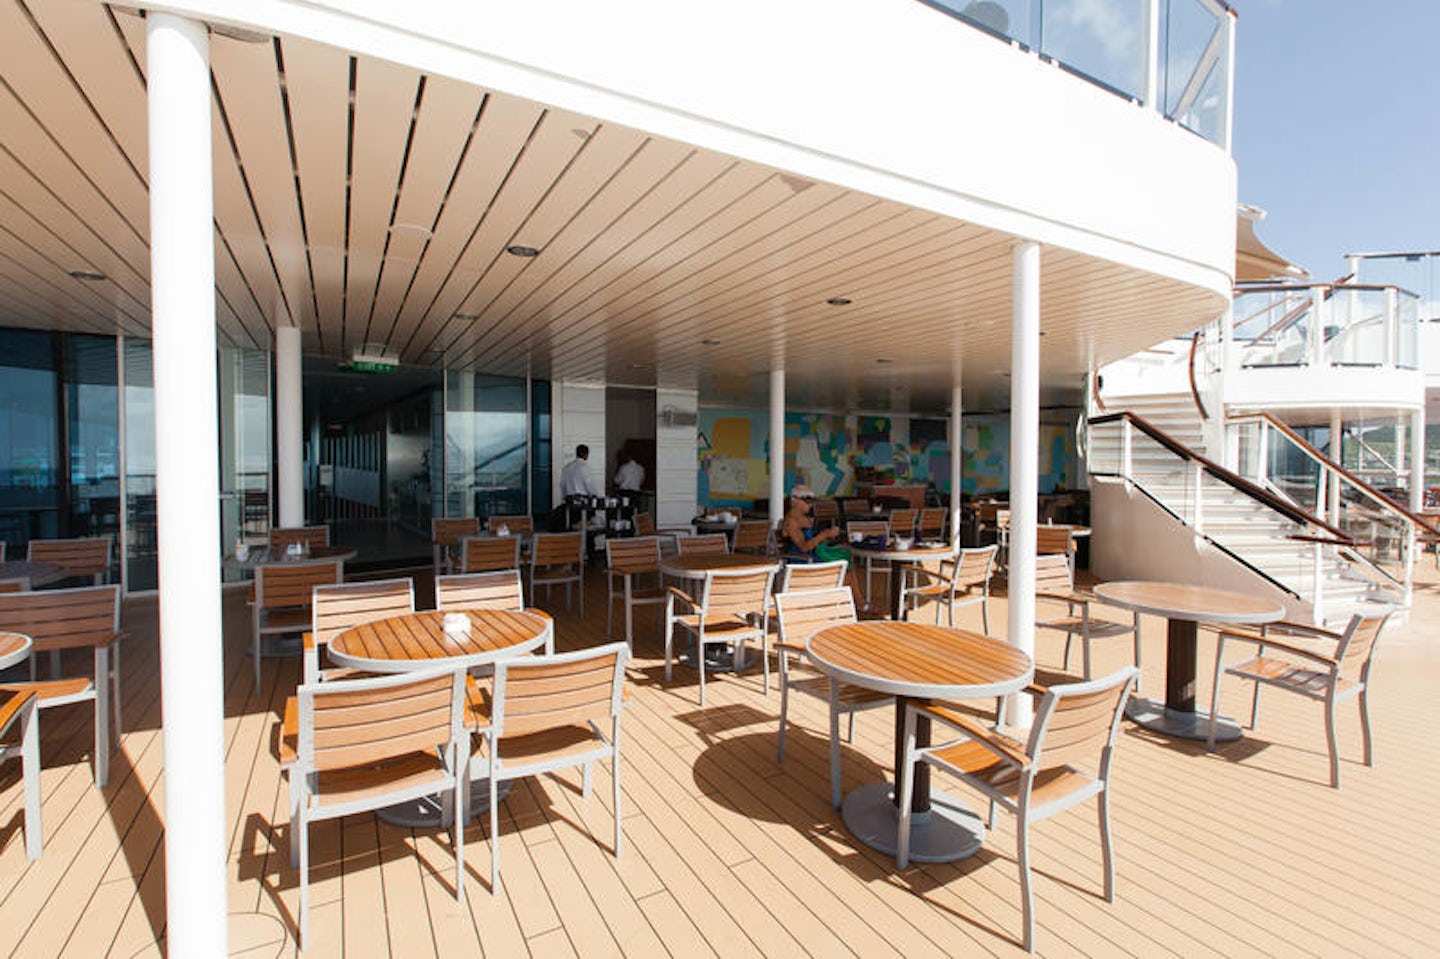 Oceanview Cafe on Celebrity Silhouette